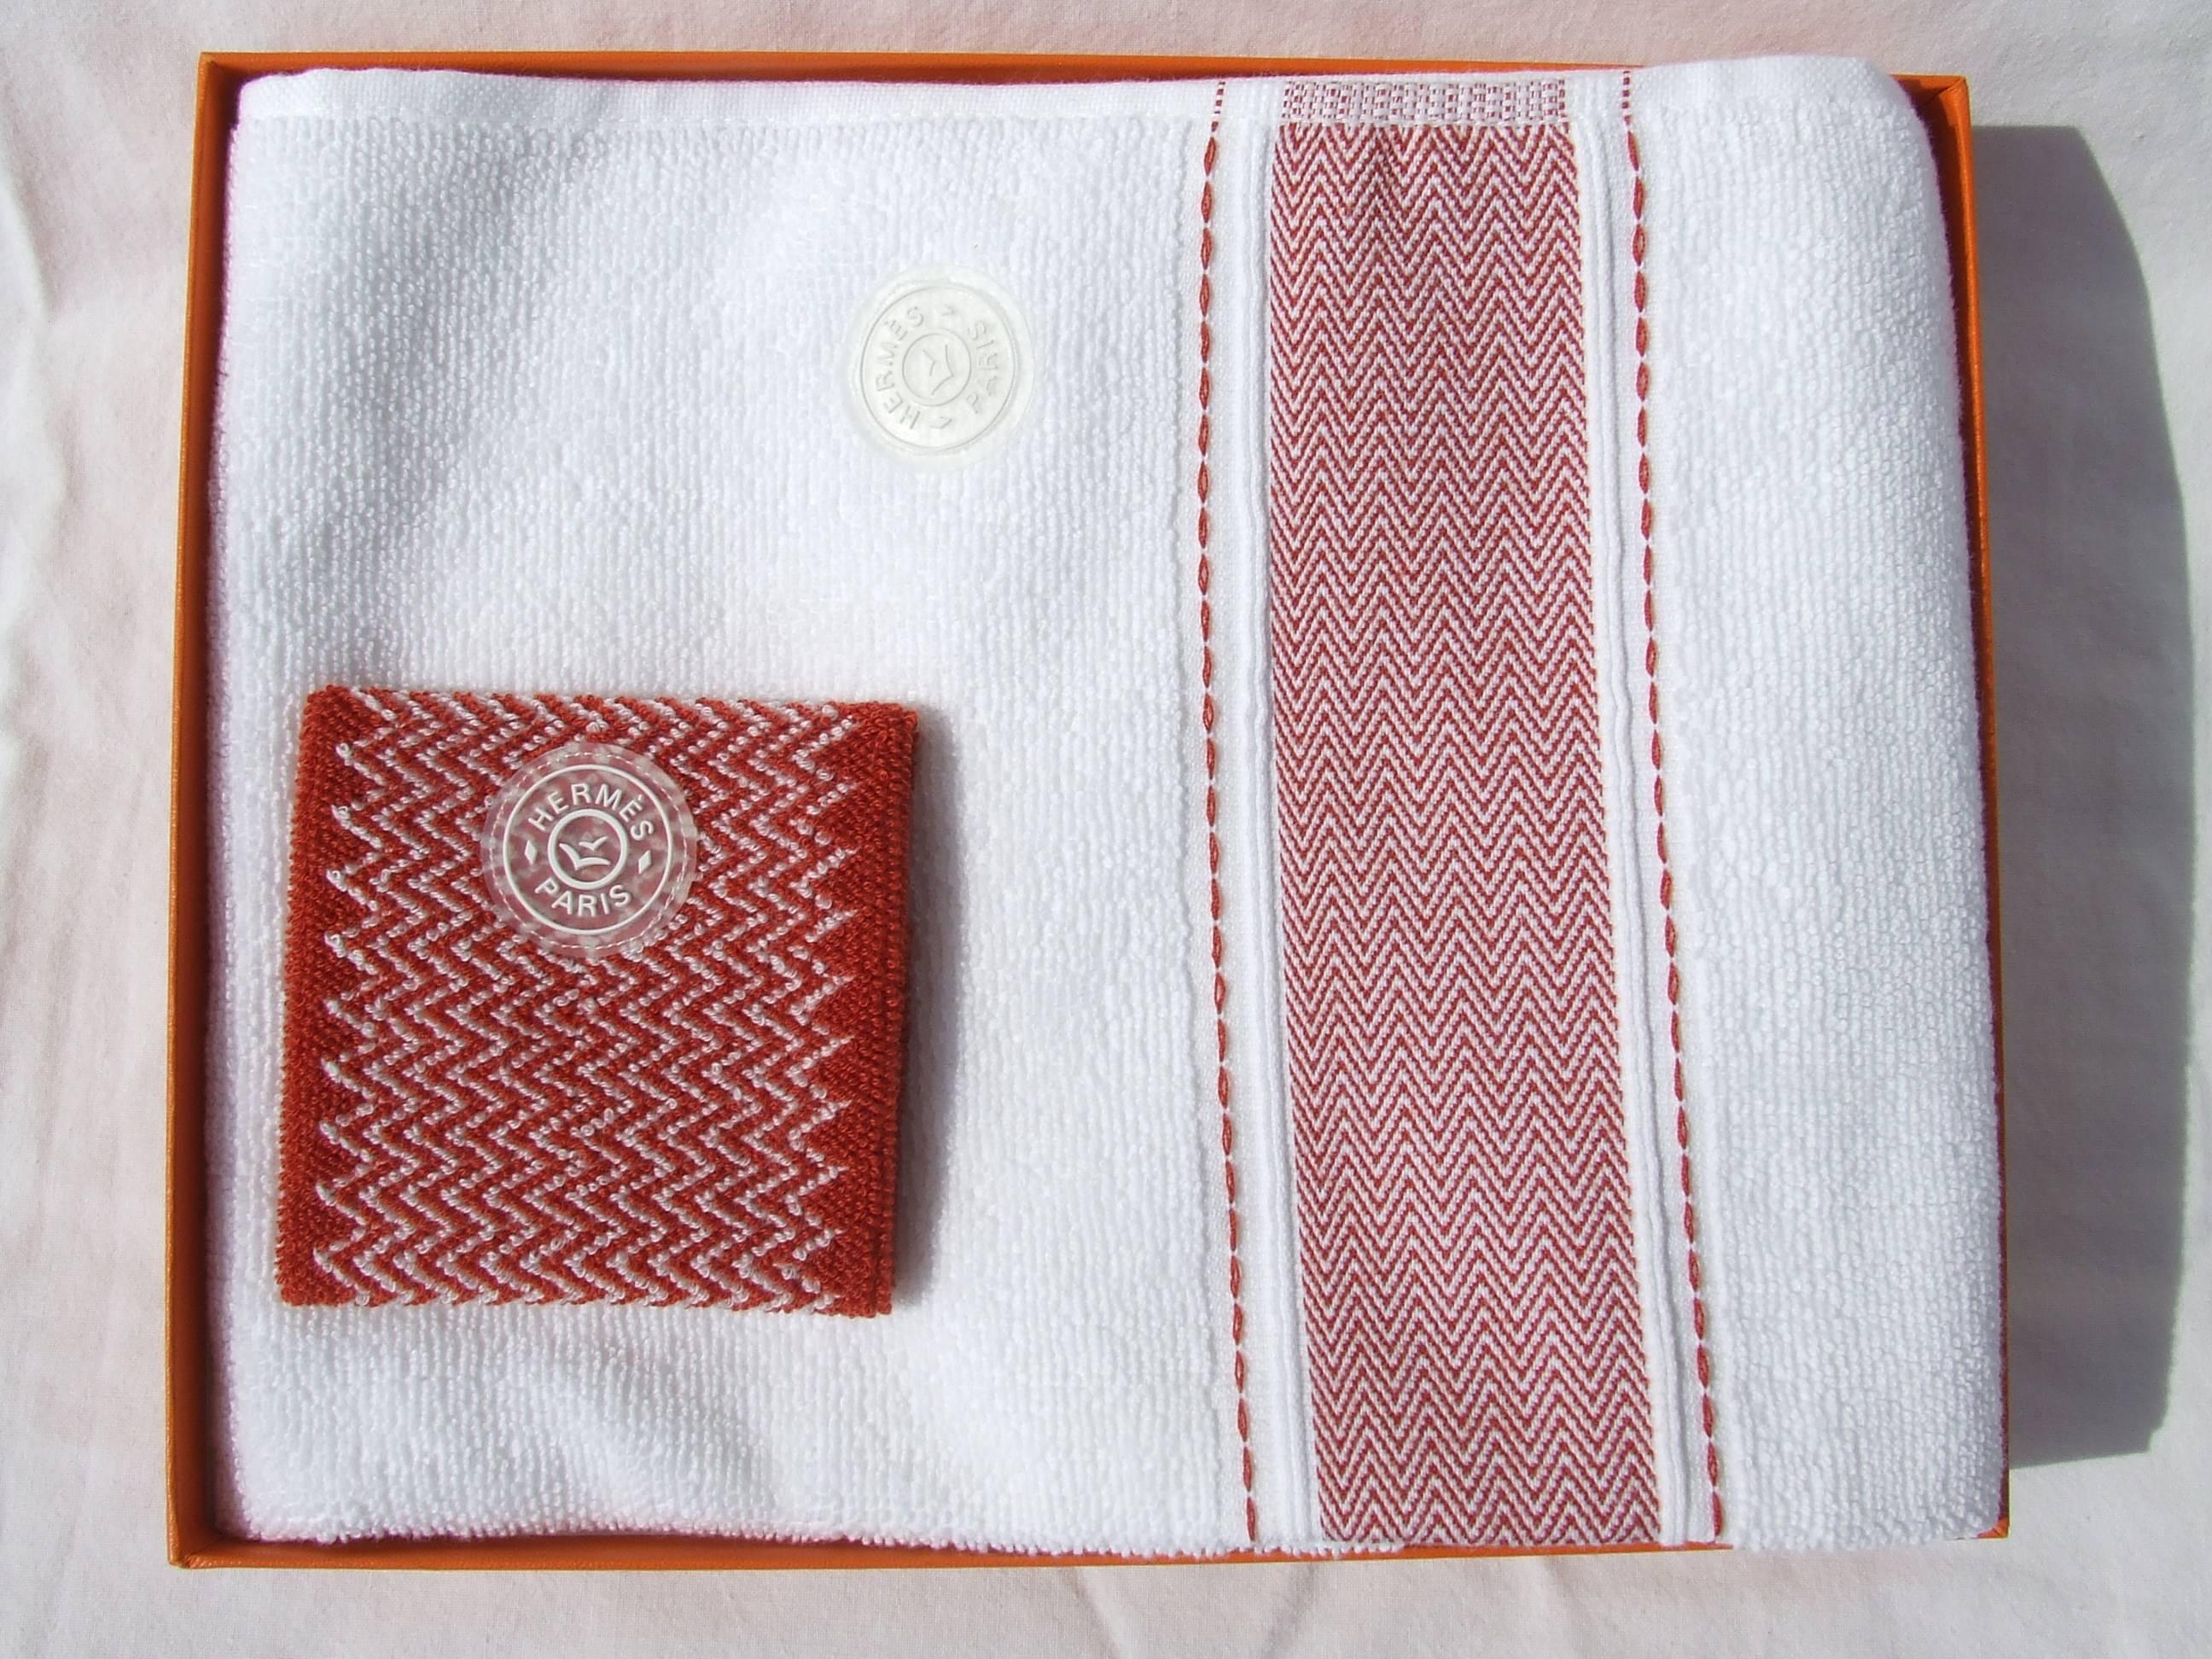 Hermès Set of Sports Towel and Sweatband Tennis Combed Cotton For Woman NIB 1